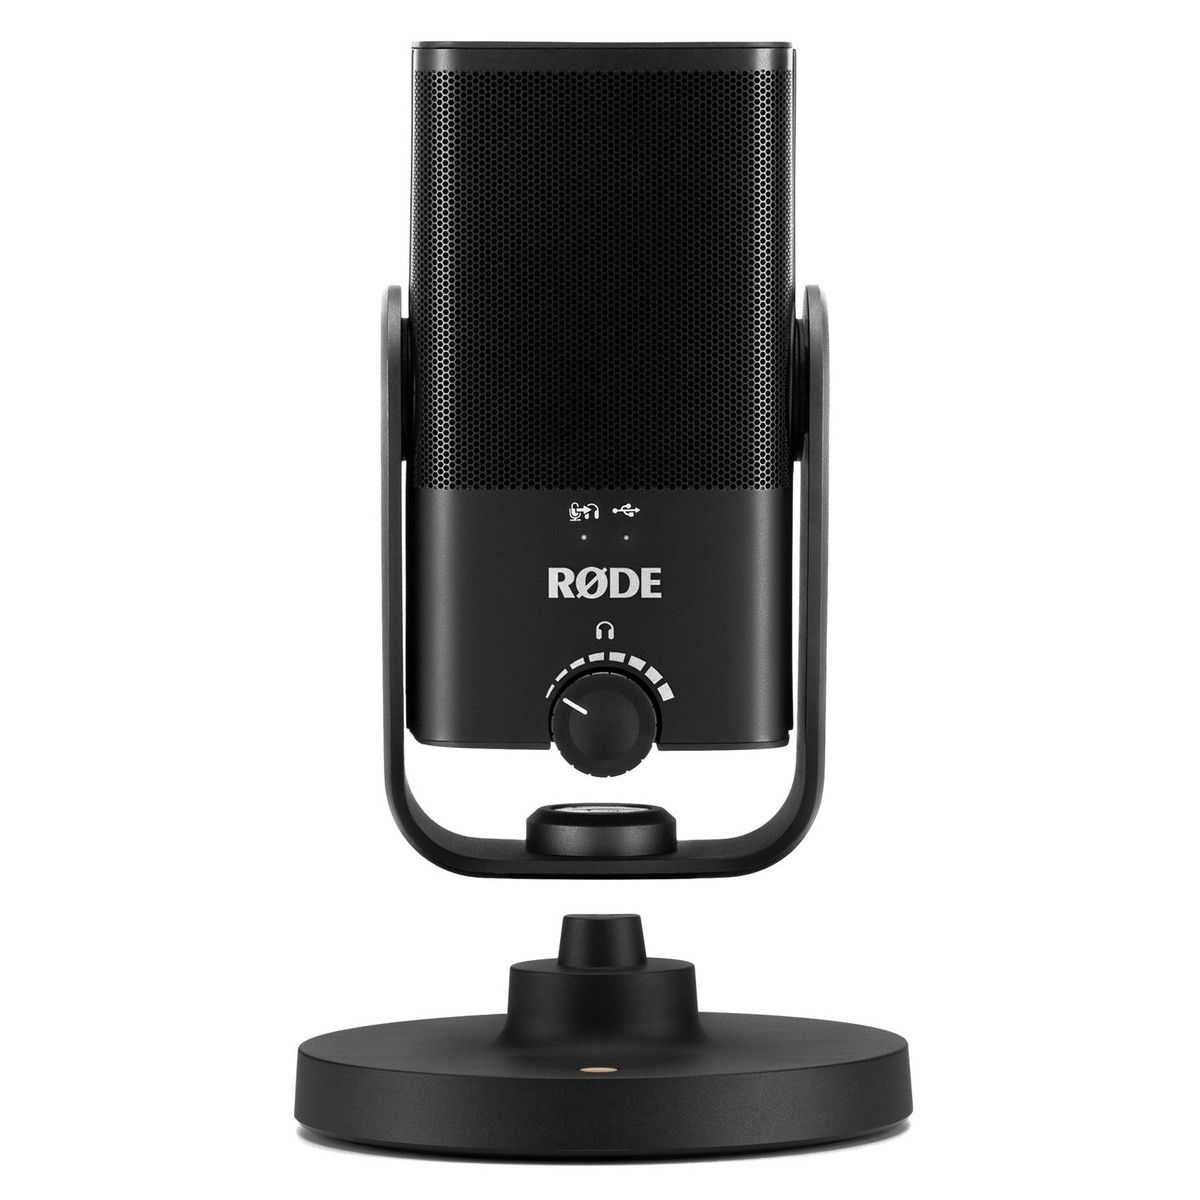 An image of Rode NT-USB Mini Microphone | PMT Online